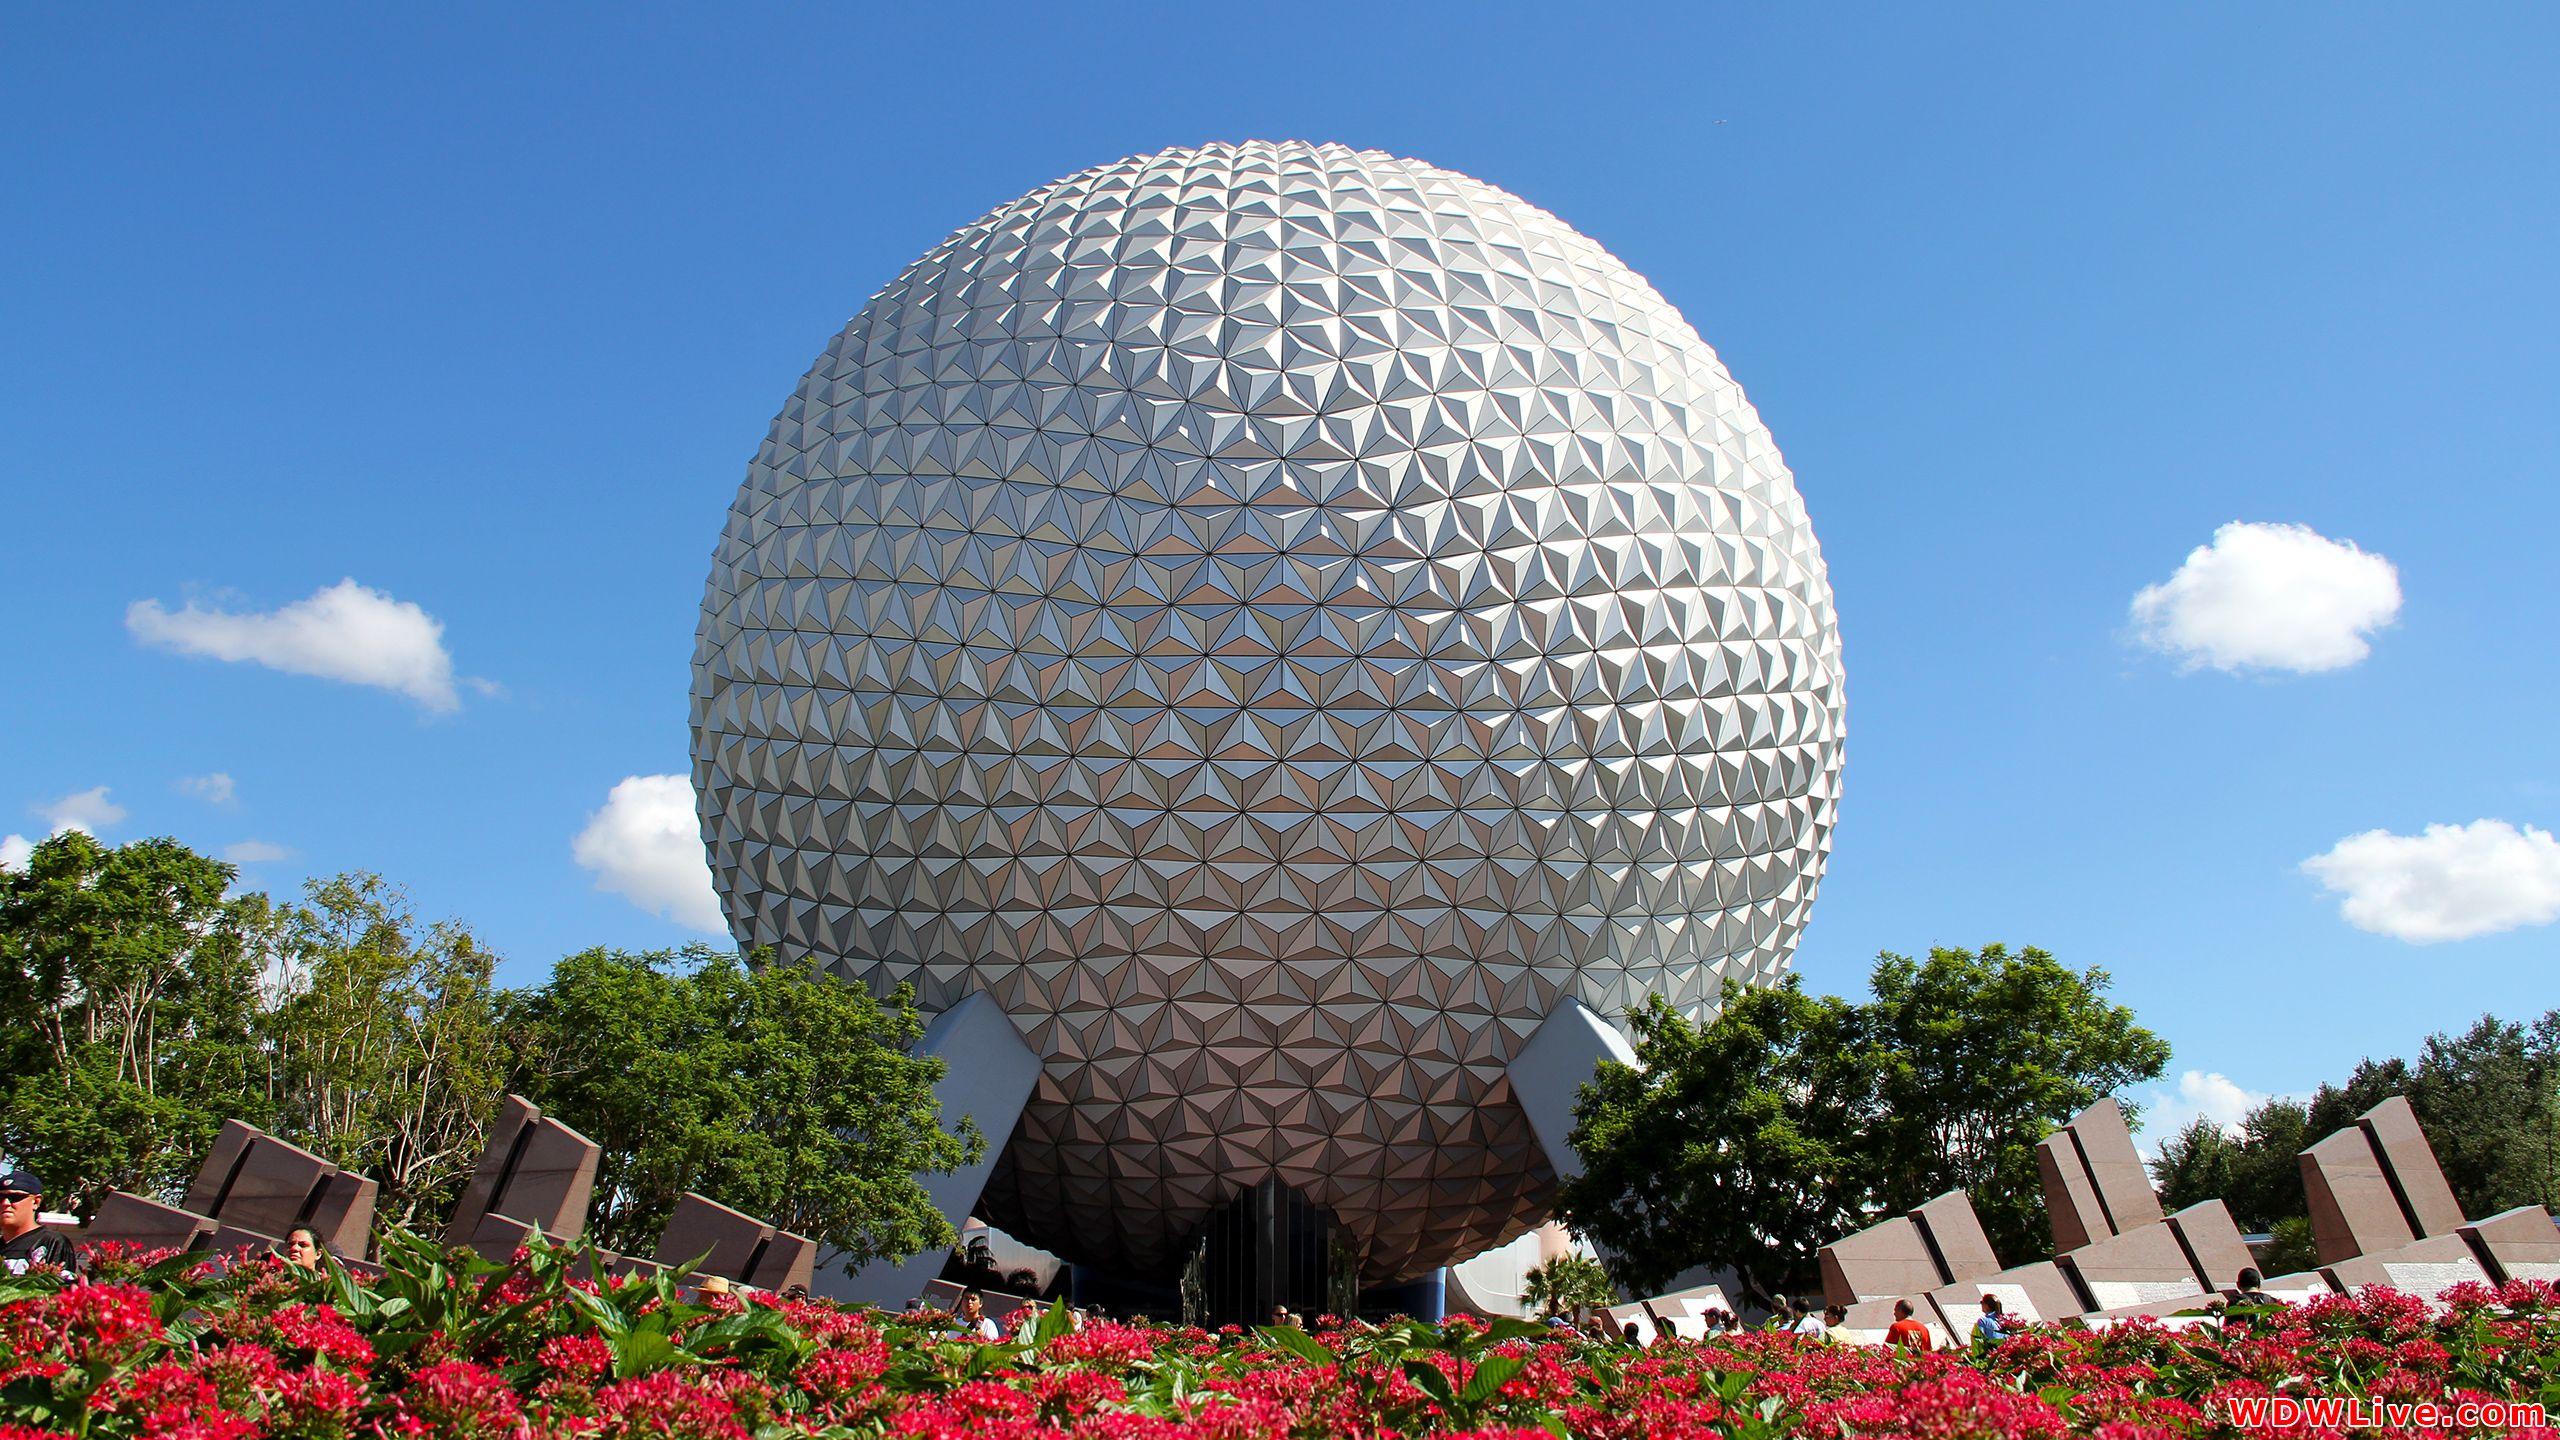 Spaceship Earth: A beautiful sunny day to visit Epcot!